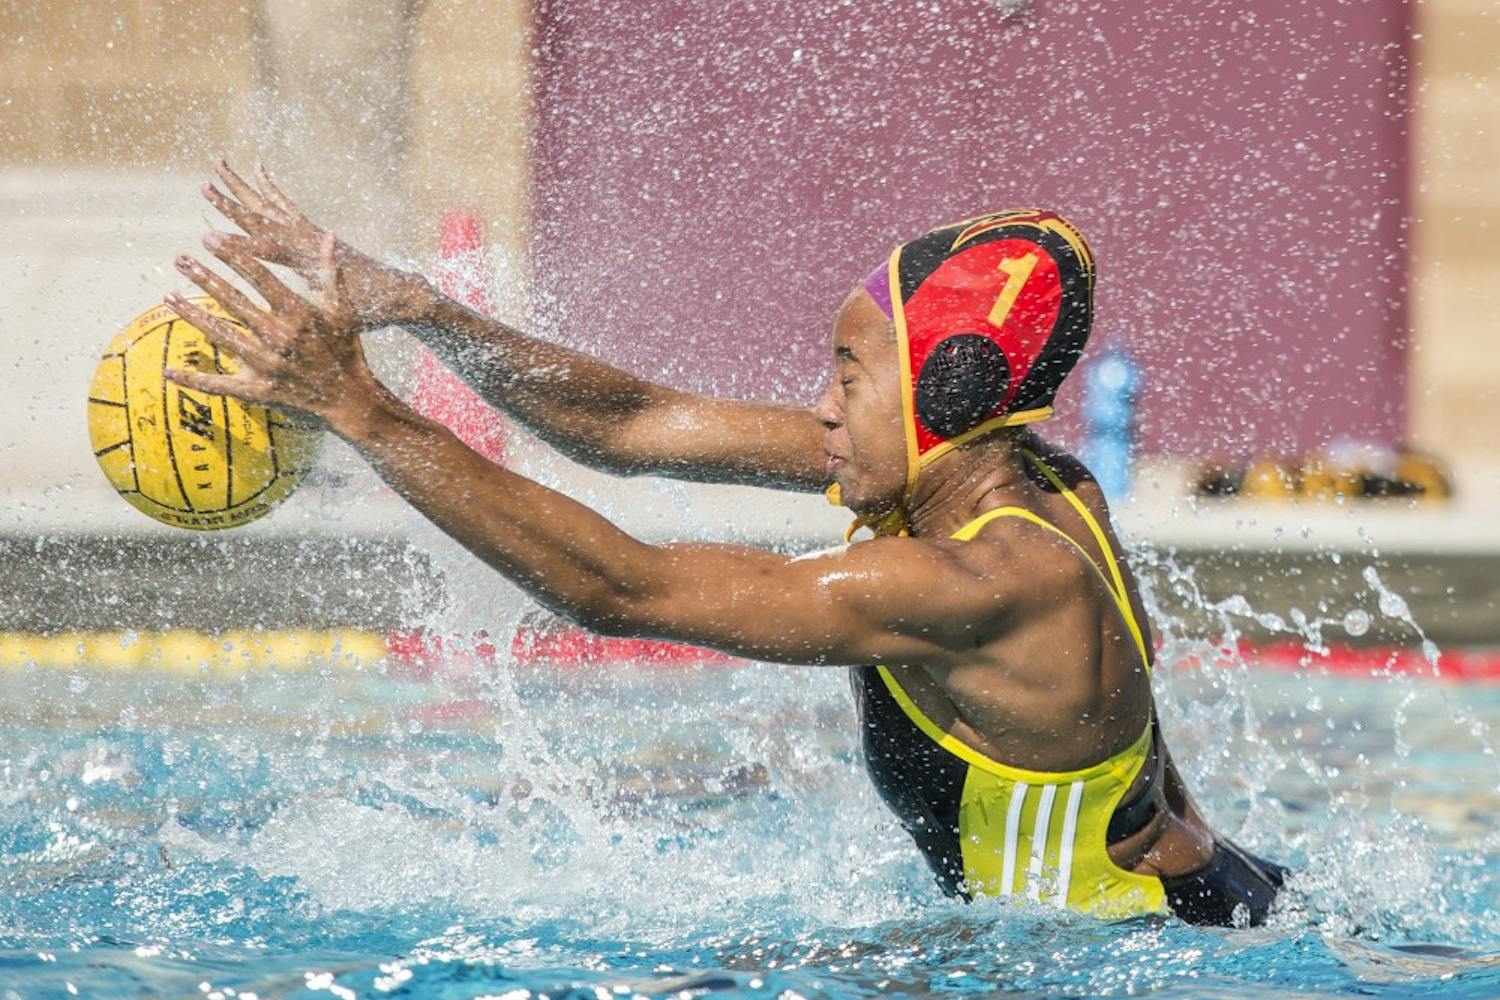 ASU goalie Mia Rycraw blocks a shot-on-goal during a game against the Indiana University Hoosiers at Mona Plummer Aquatic Center in Tempe, Ariz., on Sunday, Jan. 24, 2015. The Sun Devils won the game with a final score of 23-4. 